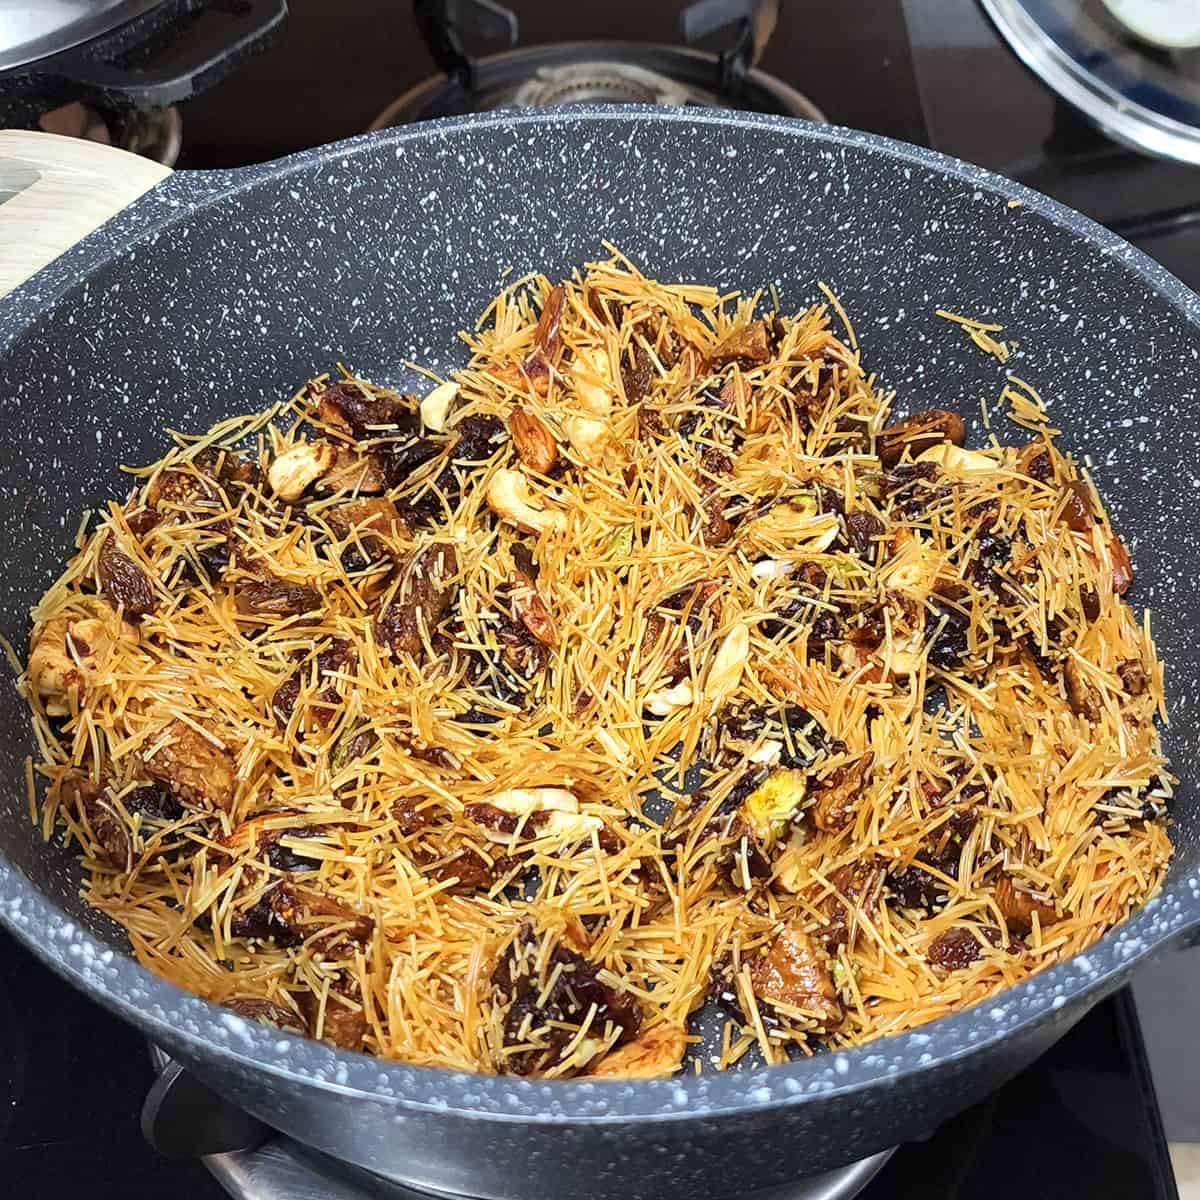 Sauté vermicelli (seviyan), dried fruits and nuts. 